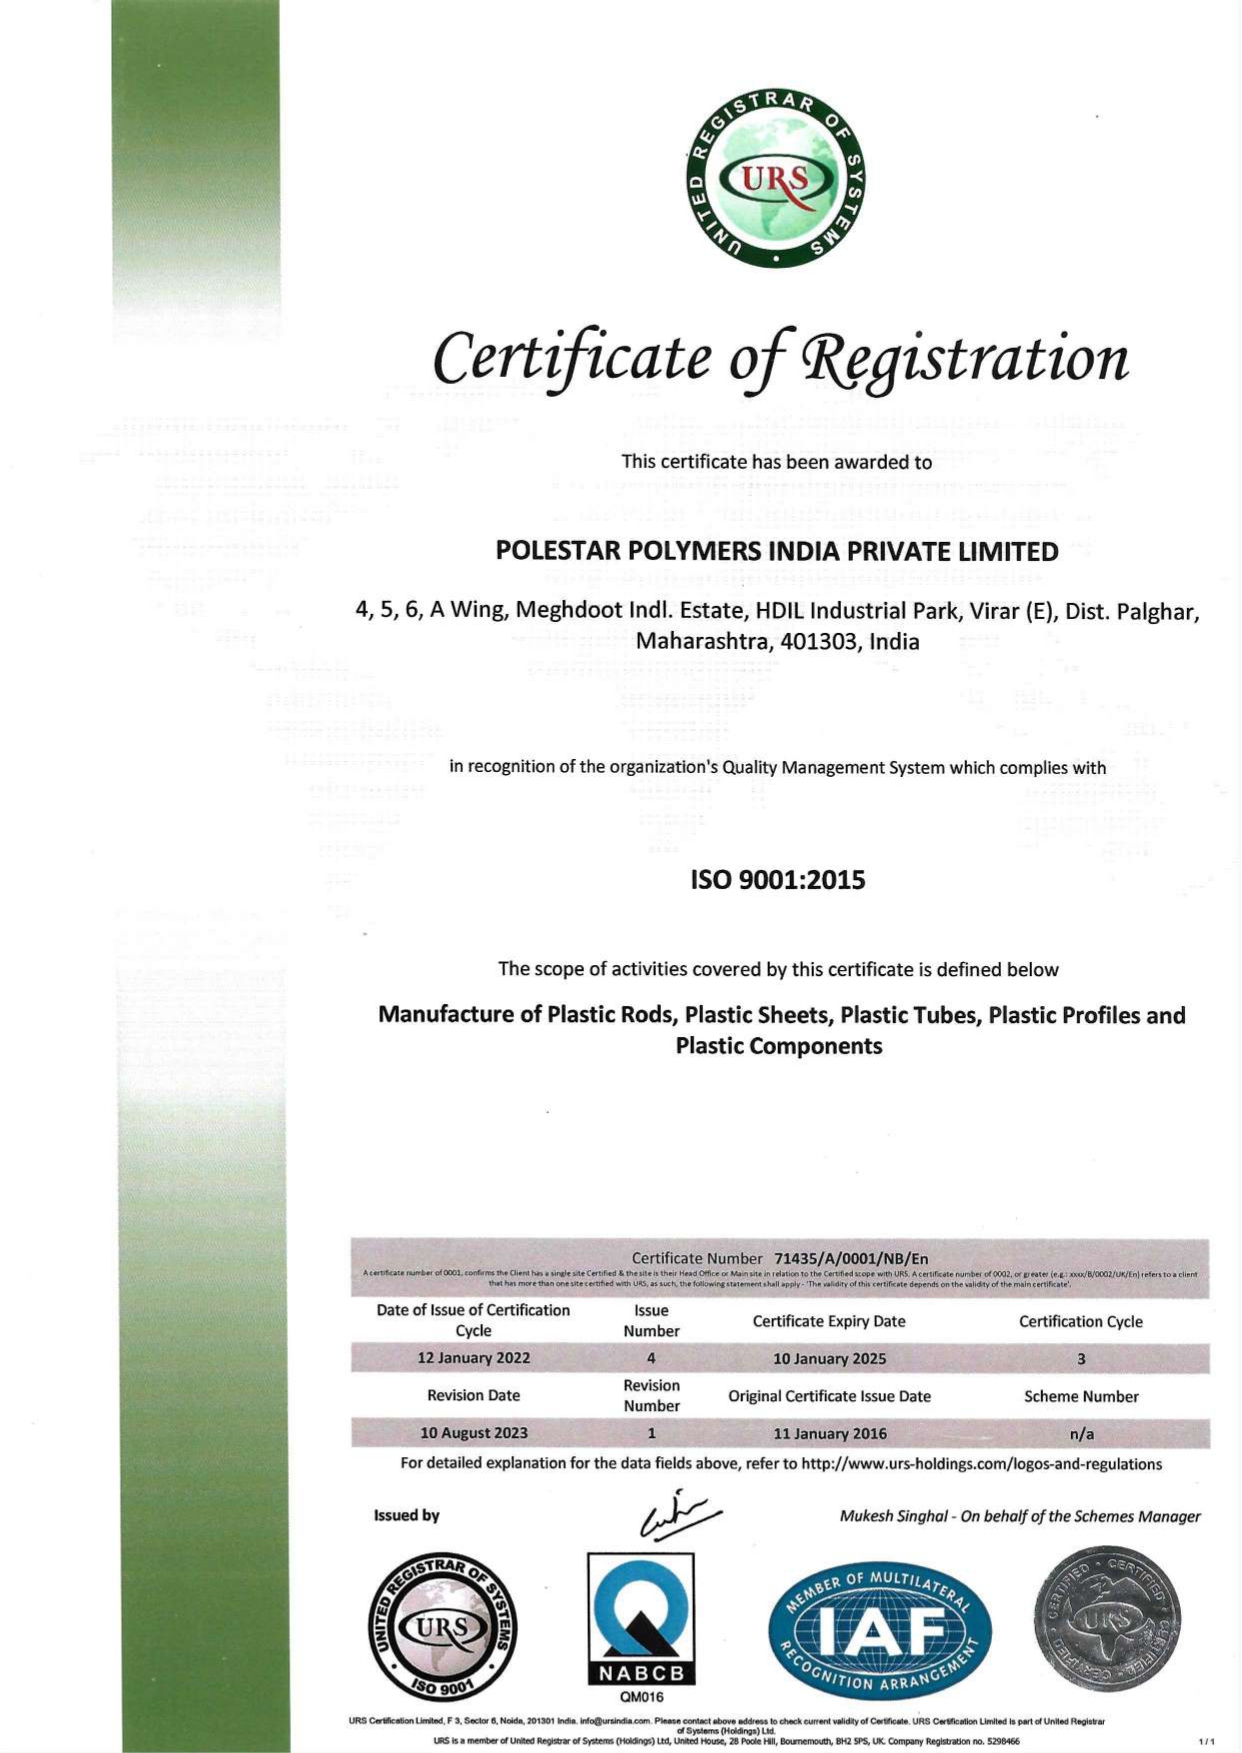 nabcb certificate of registration